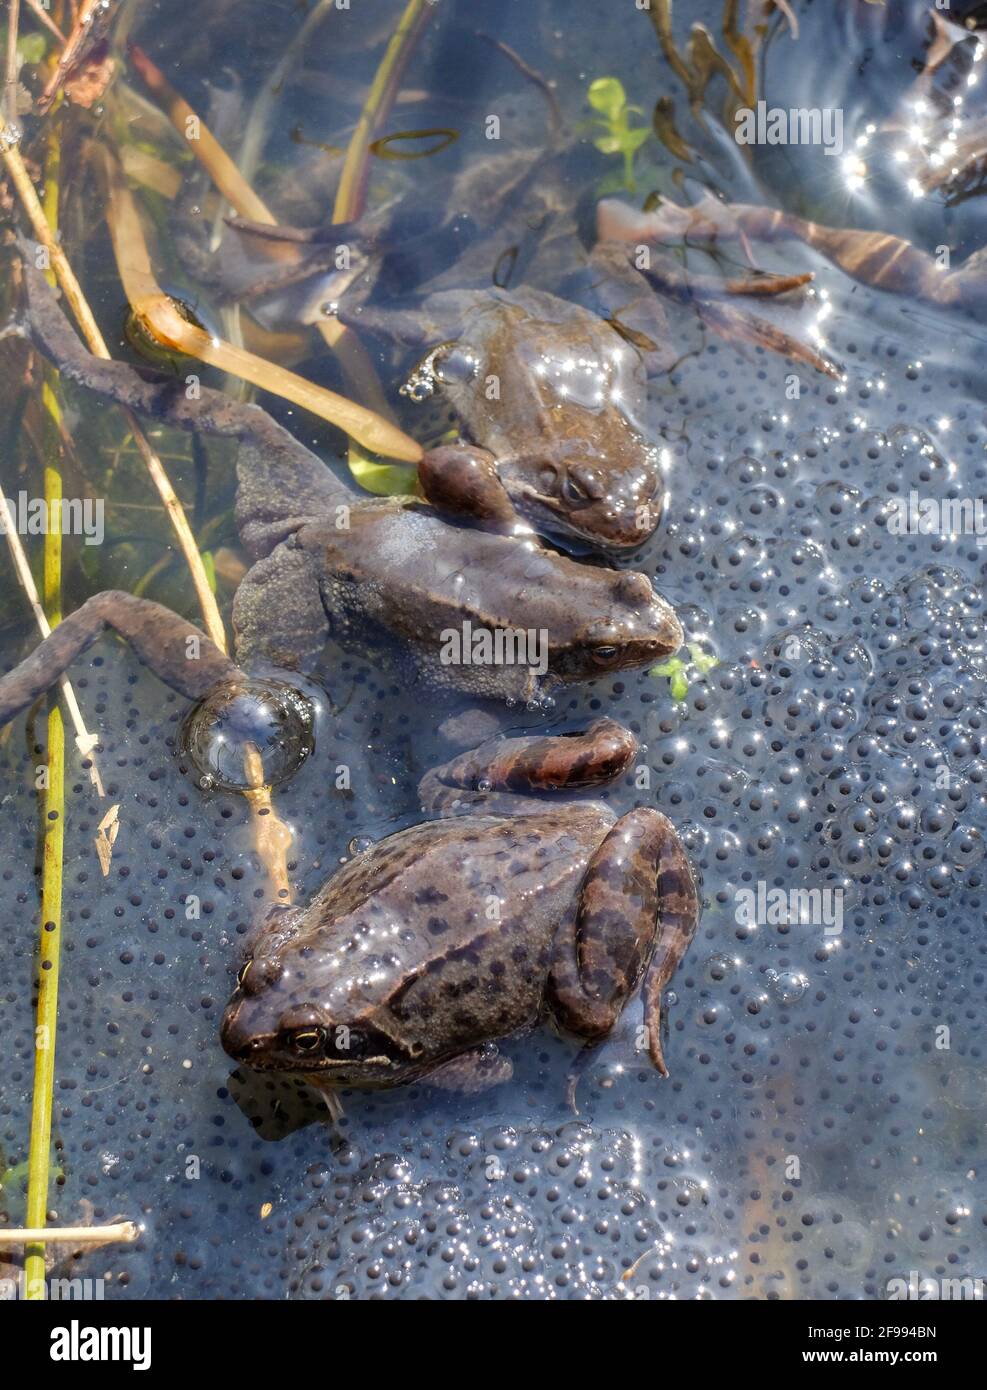 Common frogs spawning in shallow water in spring (Rana temporaria) Stock Photo